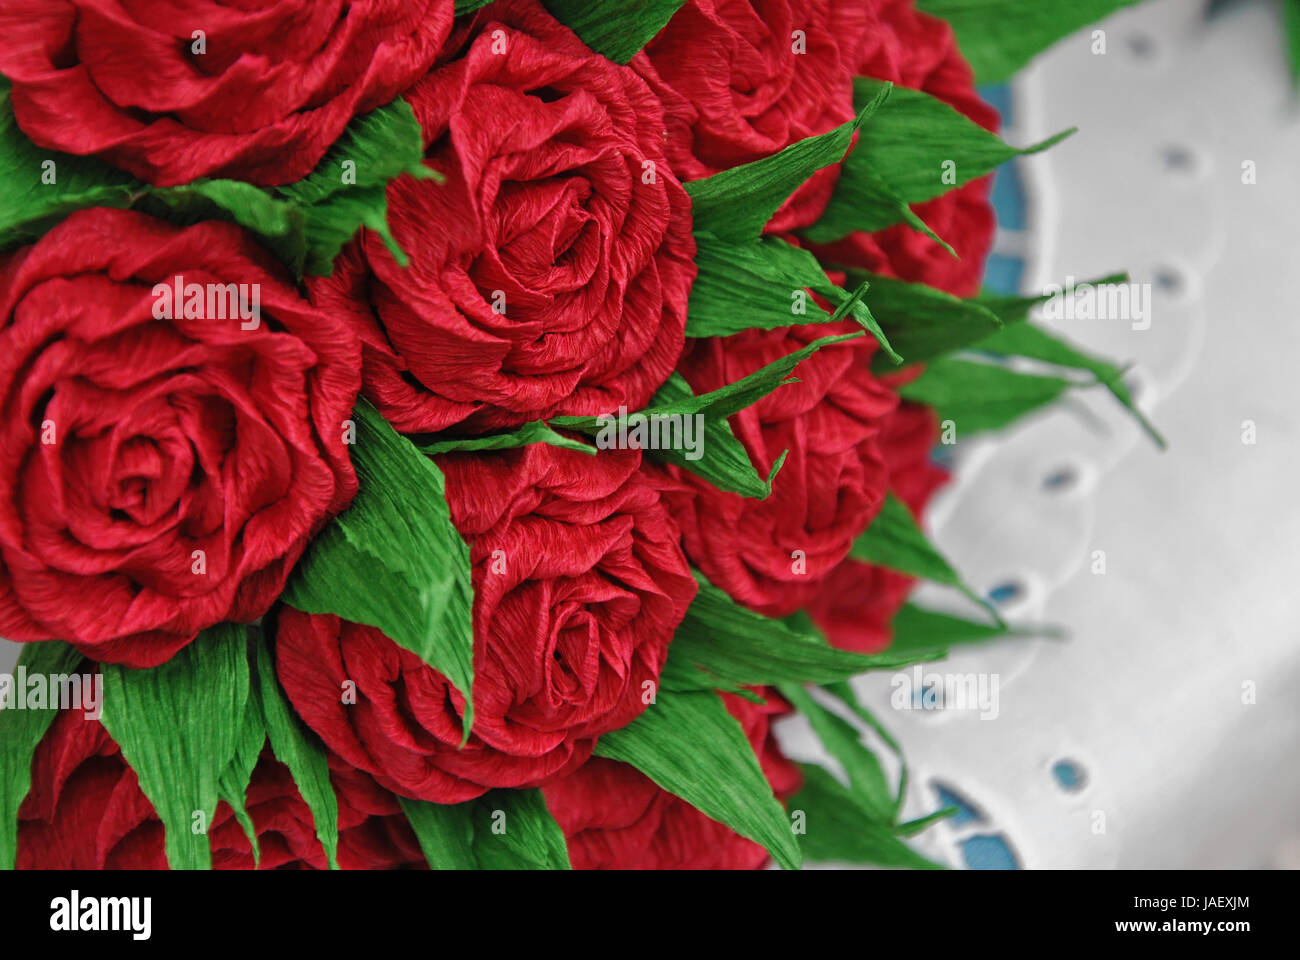 A close up photograph of handmade tissue paper rose bouquet Stock Photo